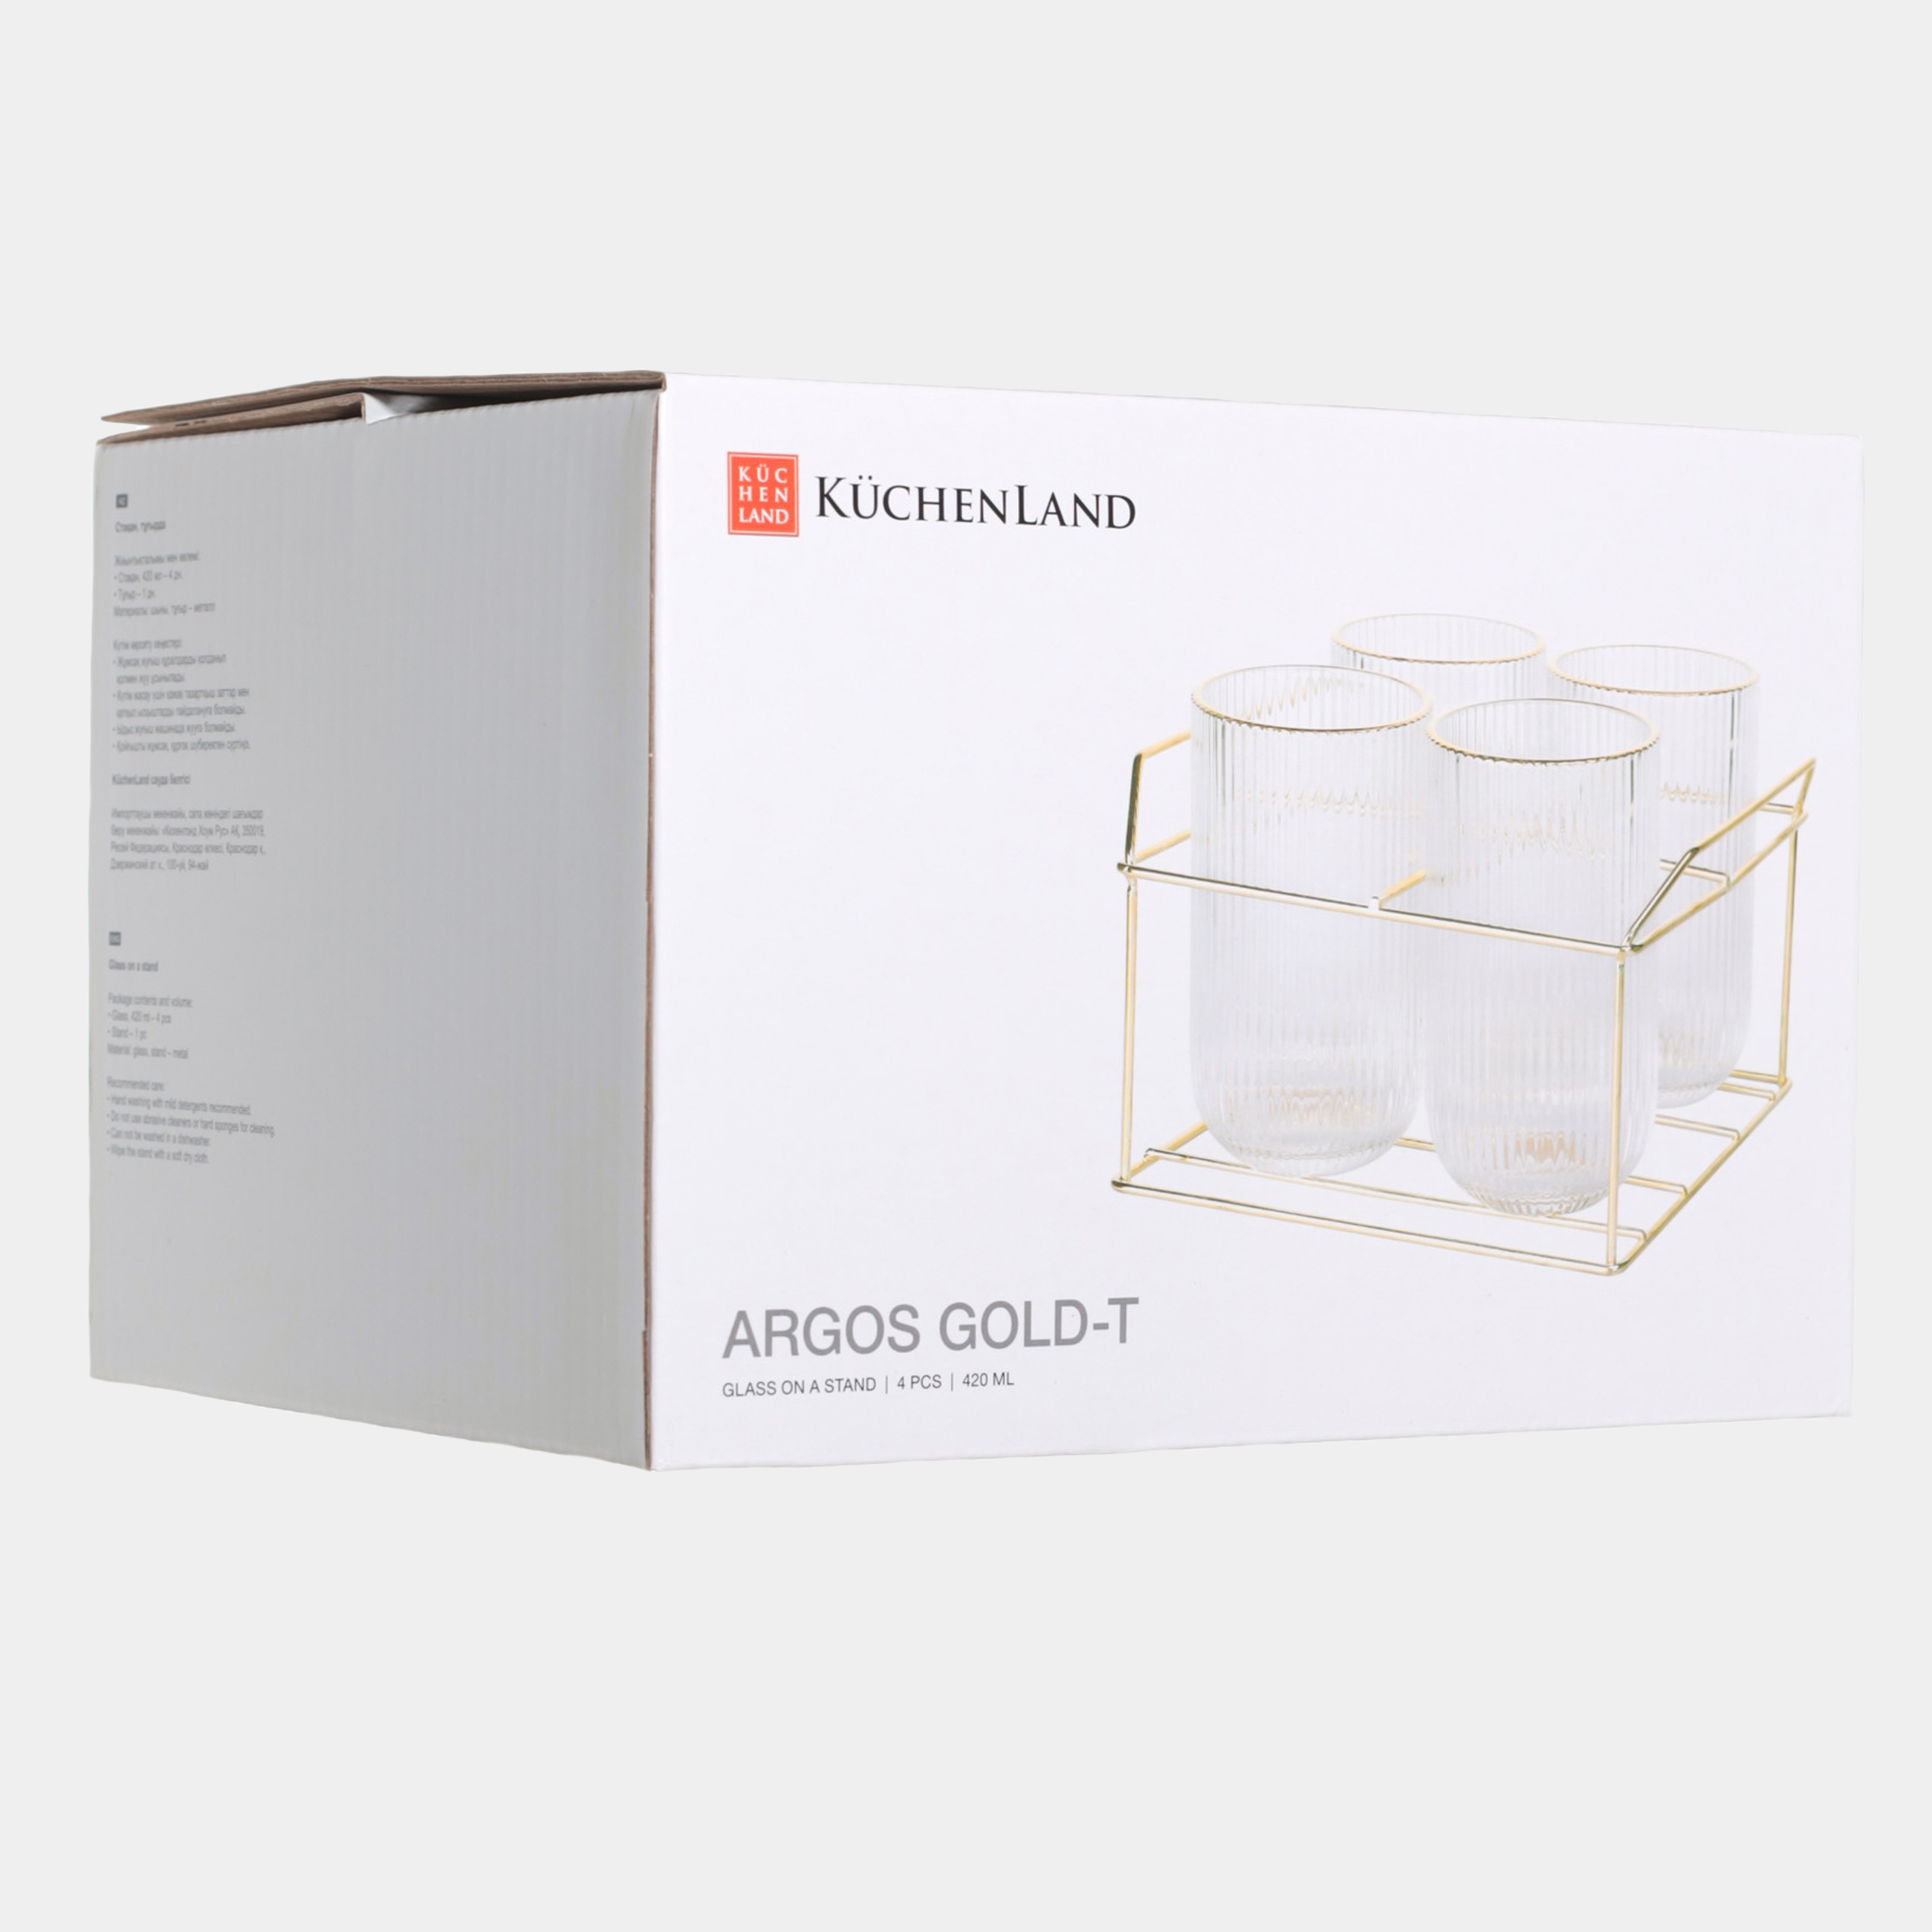 Glass, 420 ml, 4 pcs, on a stand, glass R / metal, with golden edging, Argos gold-t изображение № 7